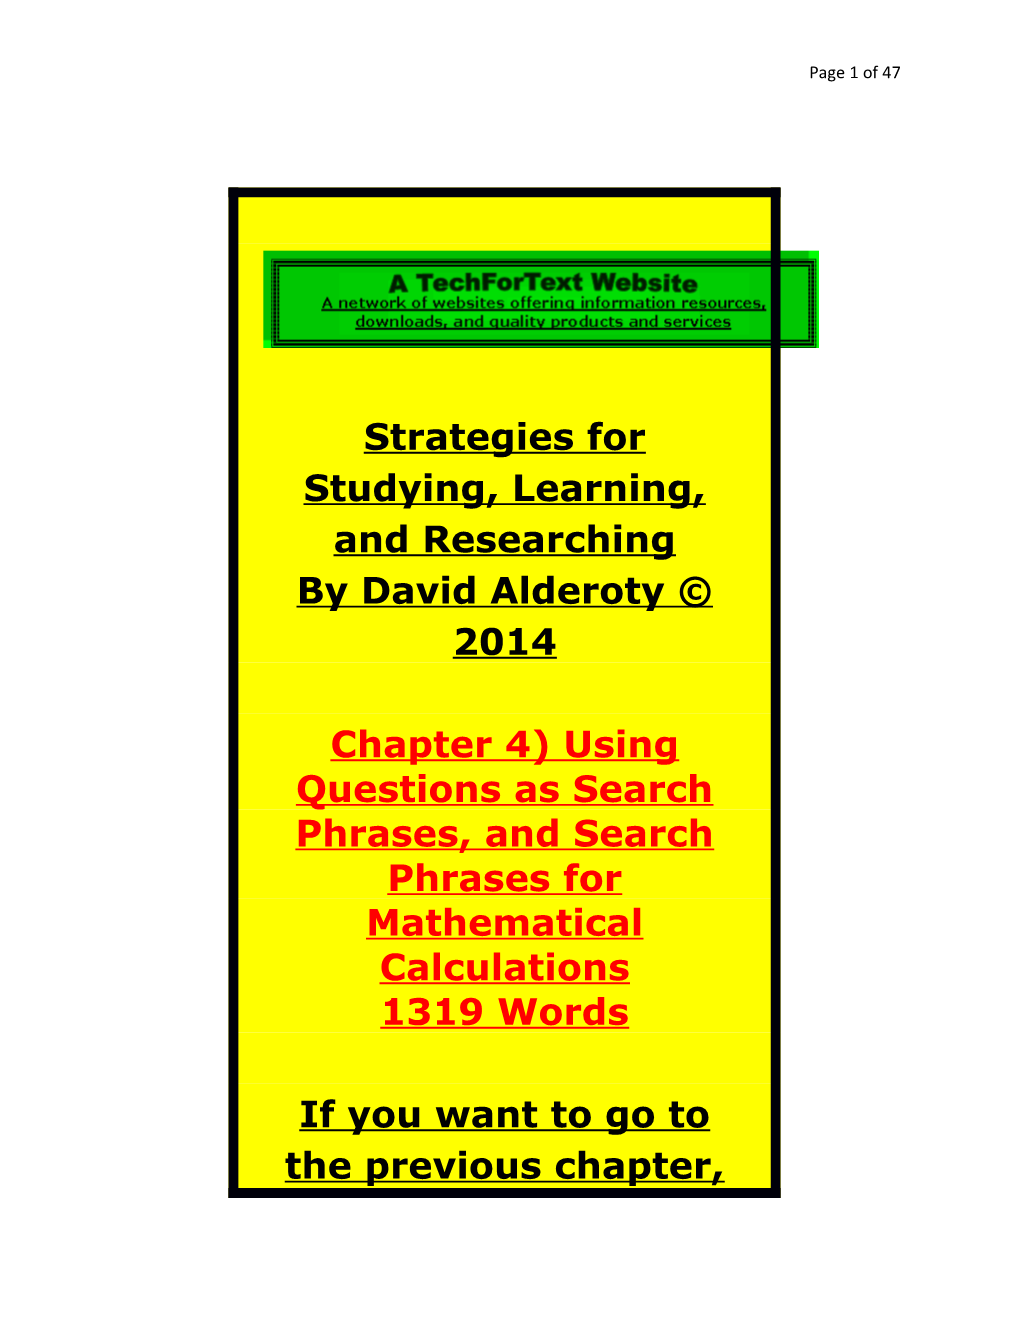 Chapter 4) Using Questions As Search Phrases, and Search Phrases for Mathematical Calculations